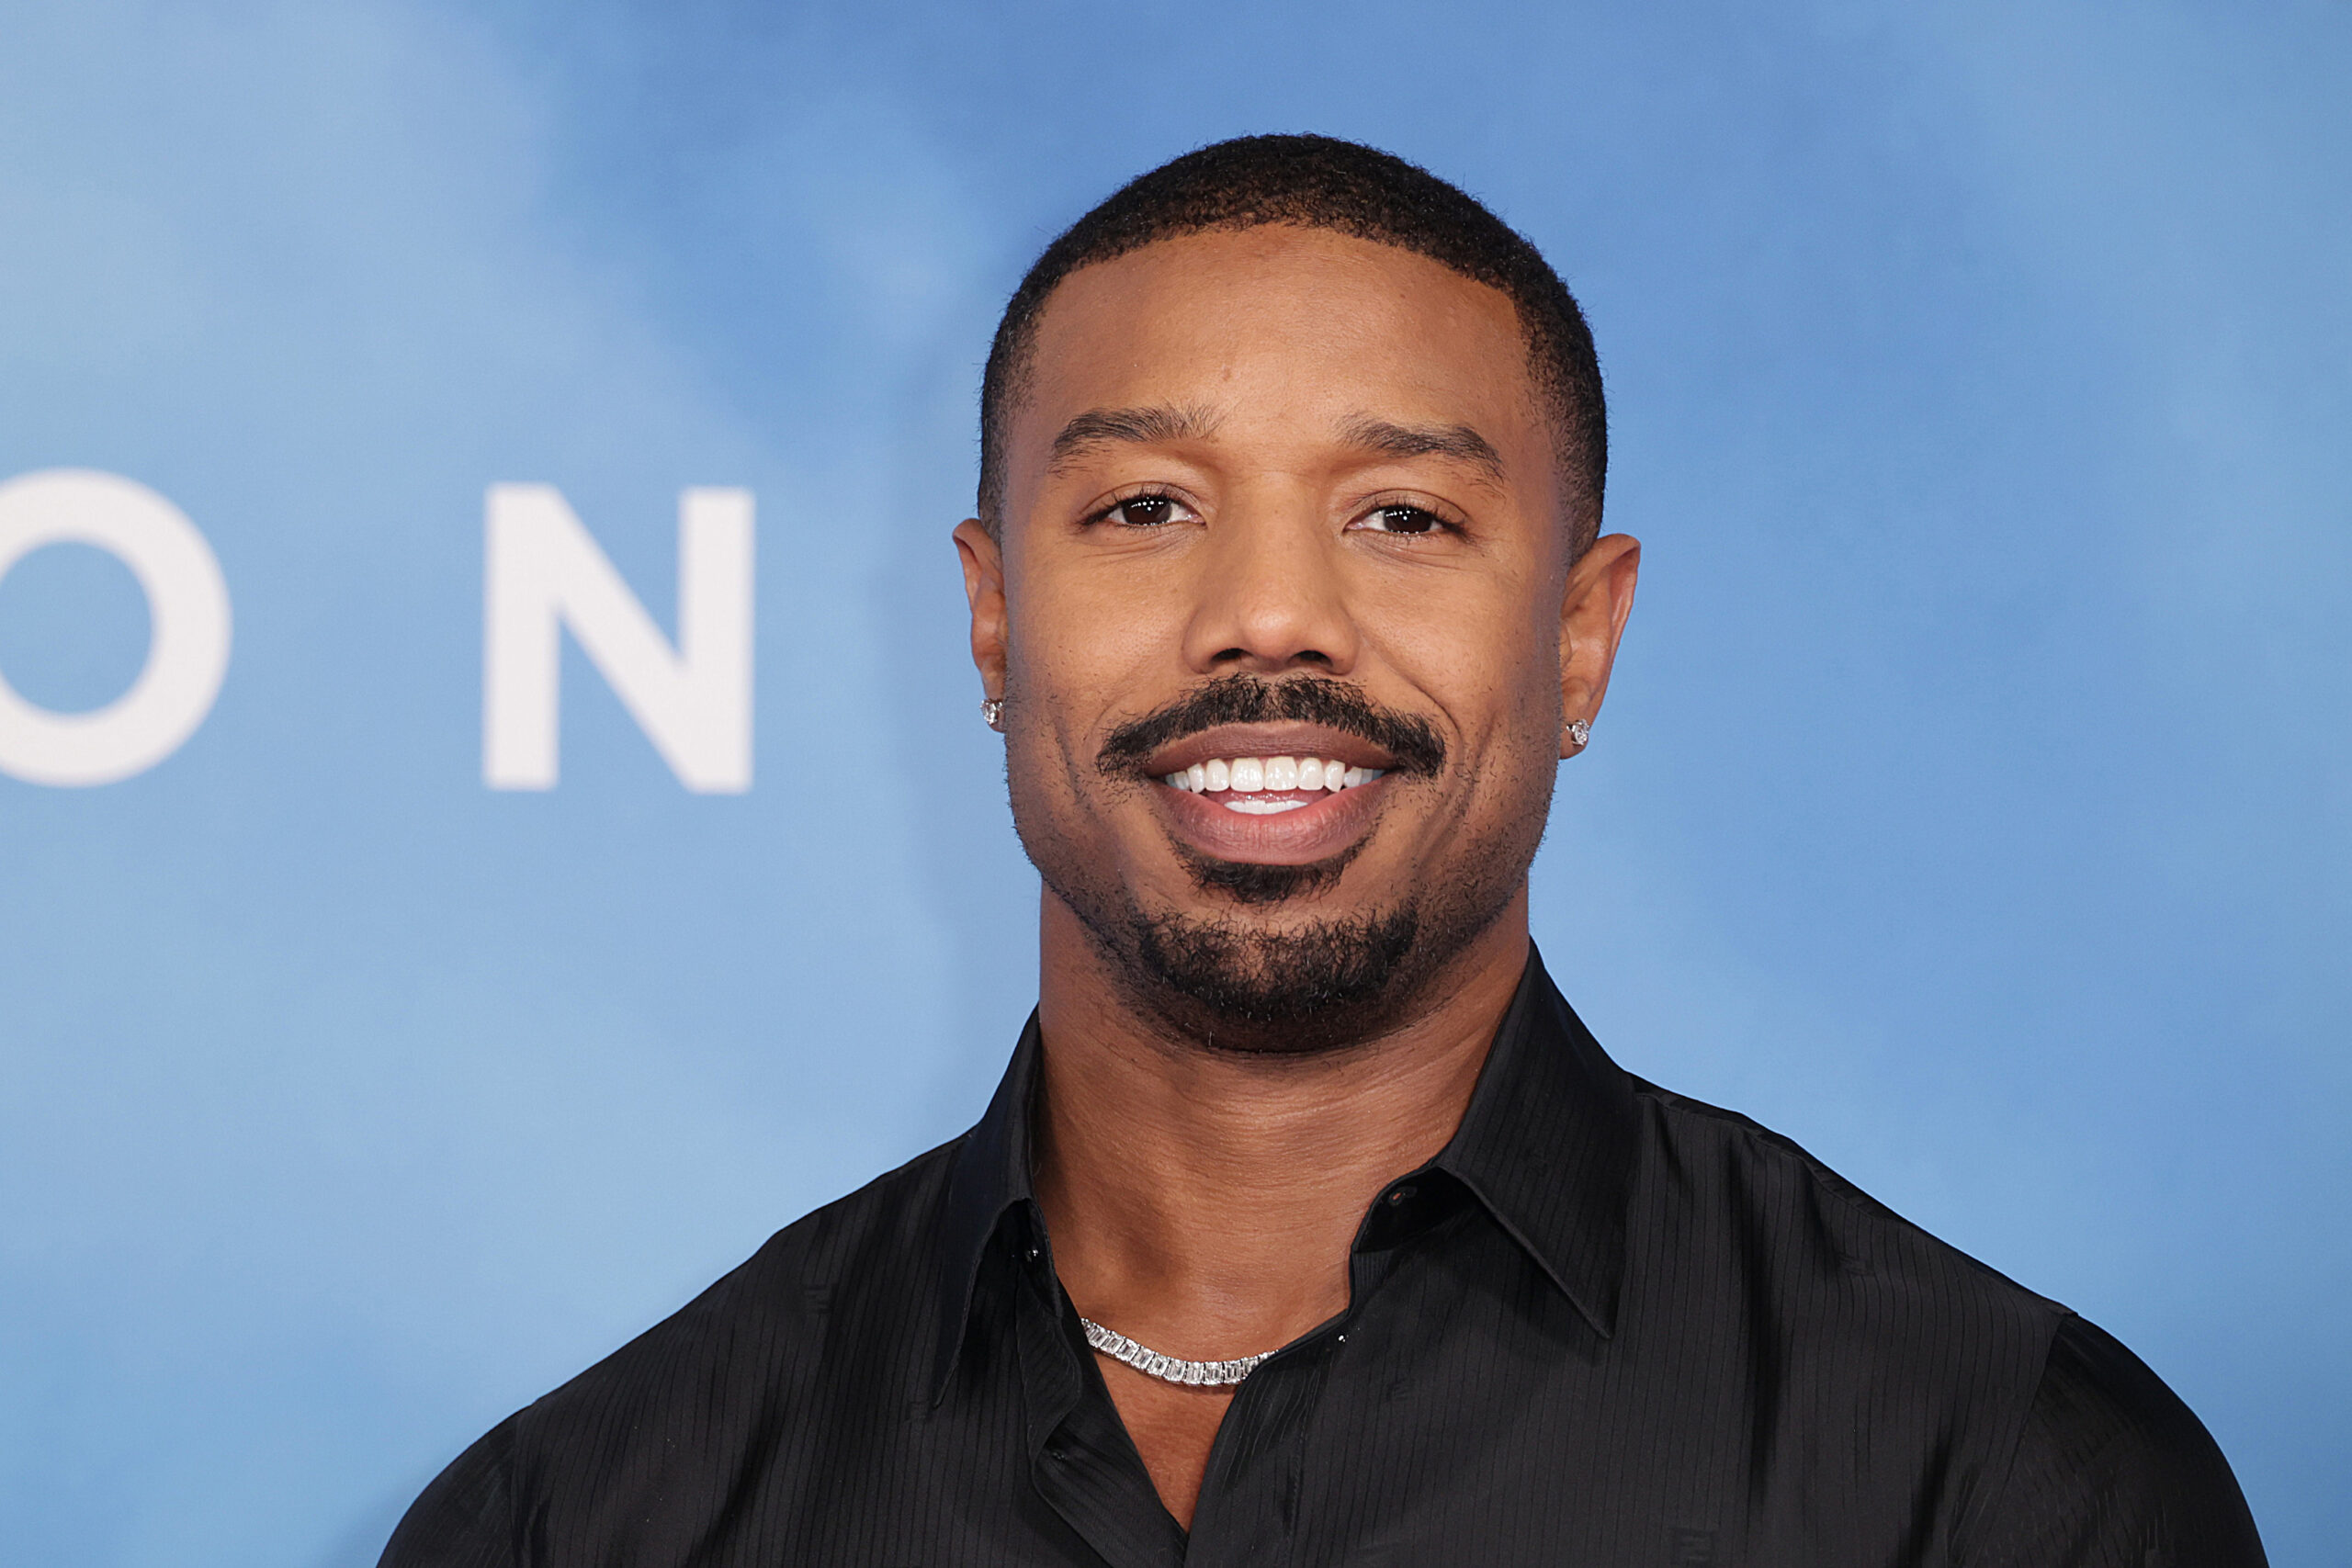 Michael B. Jordan wants this co-star to be Sexiest Man Alive